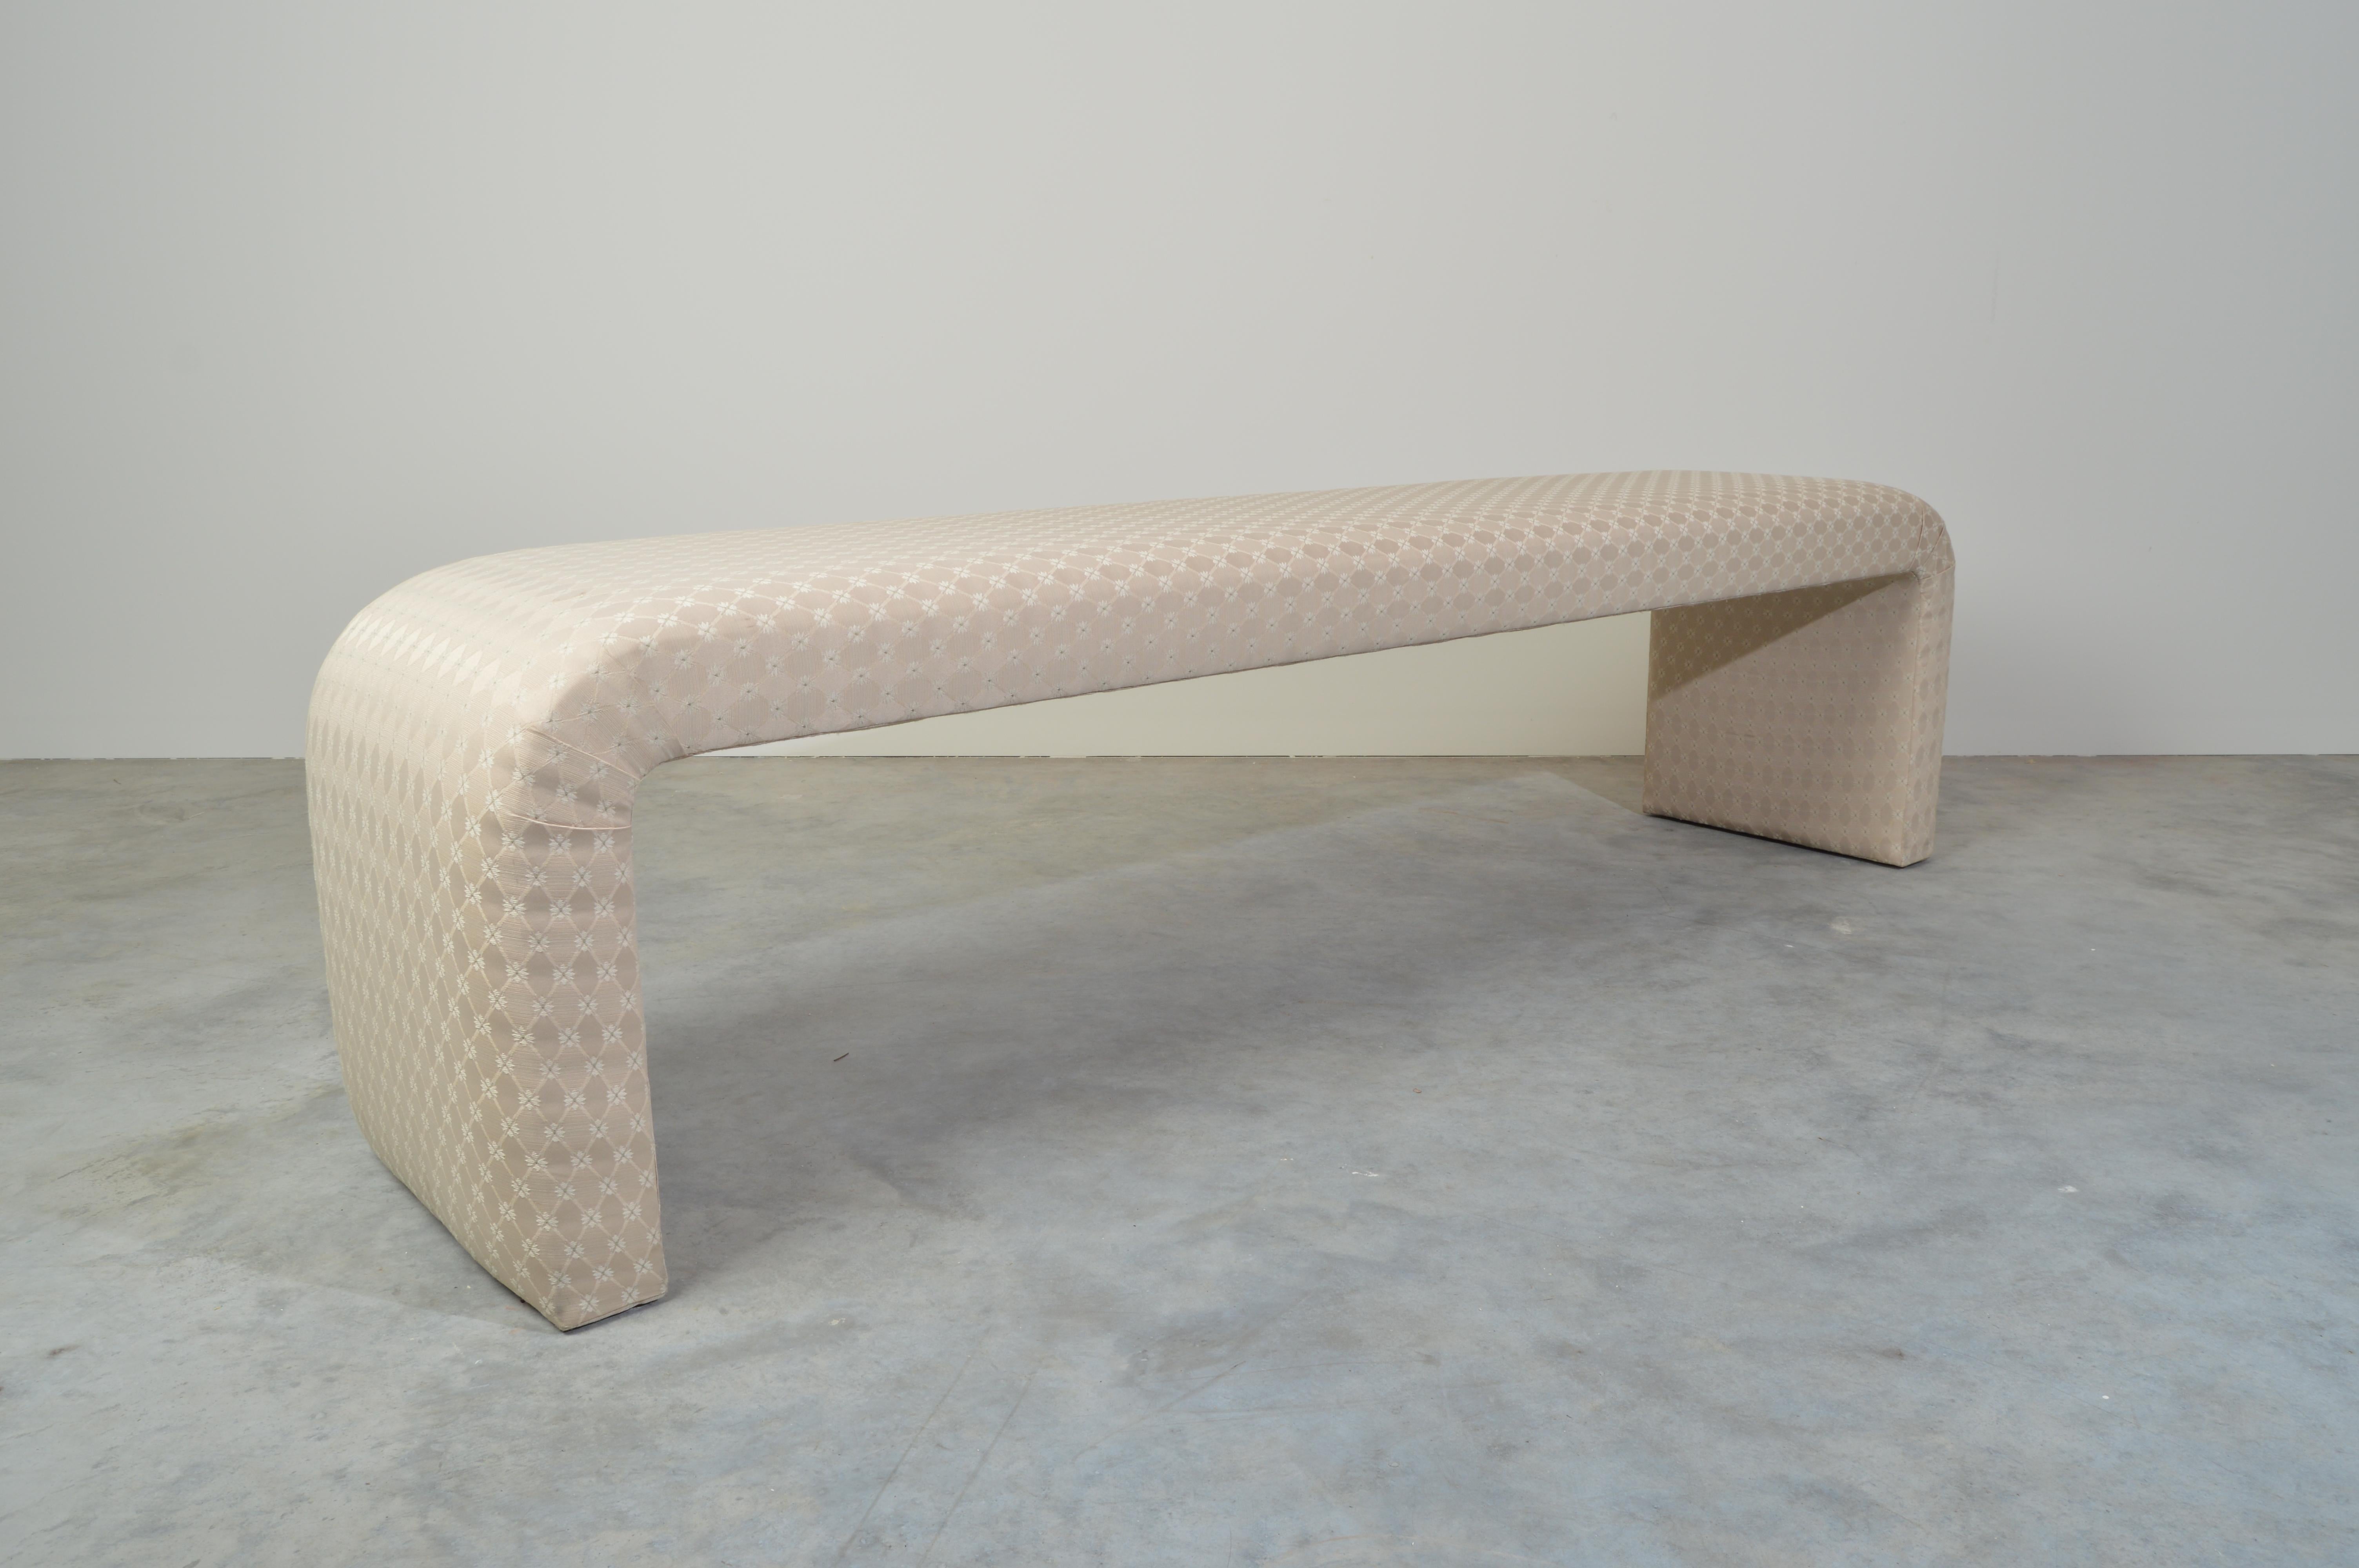 Exceptionally lithe 1980s contemporary upholstered waterfall bench of solid bent wood constructed interior. Suitable for a variety of settings. Generous 74